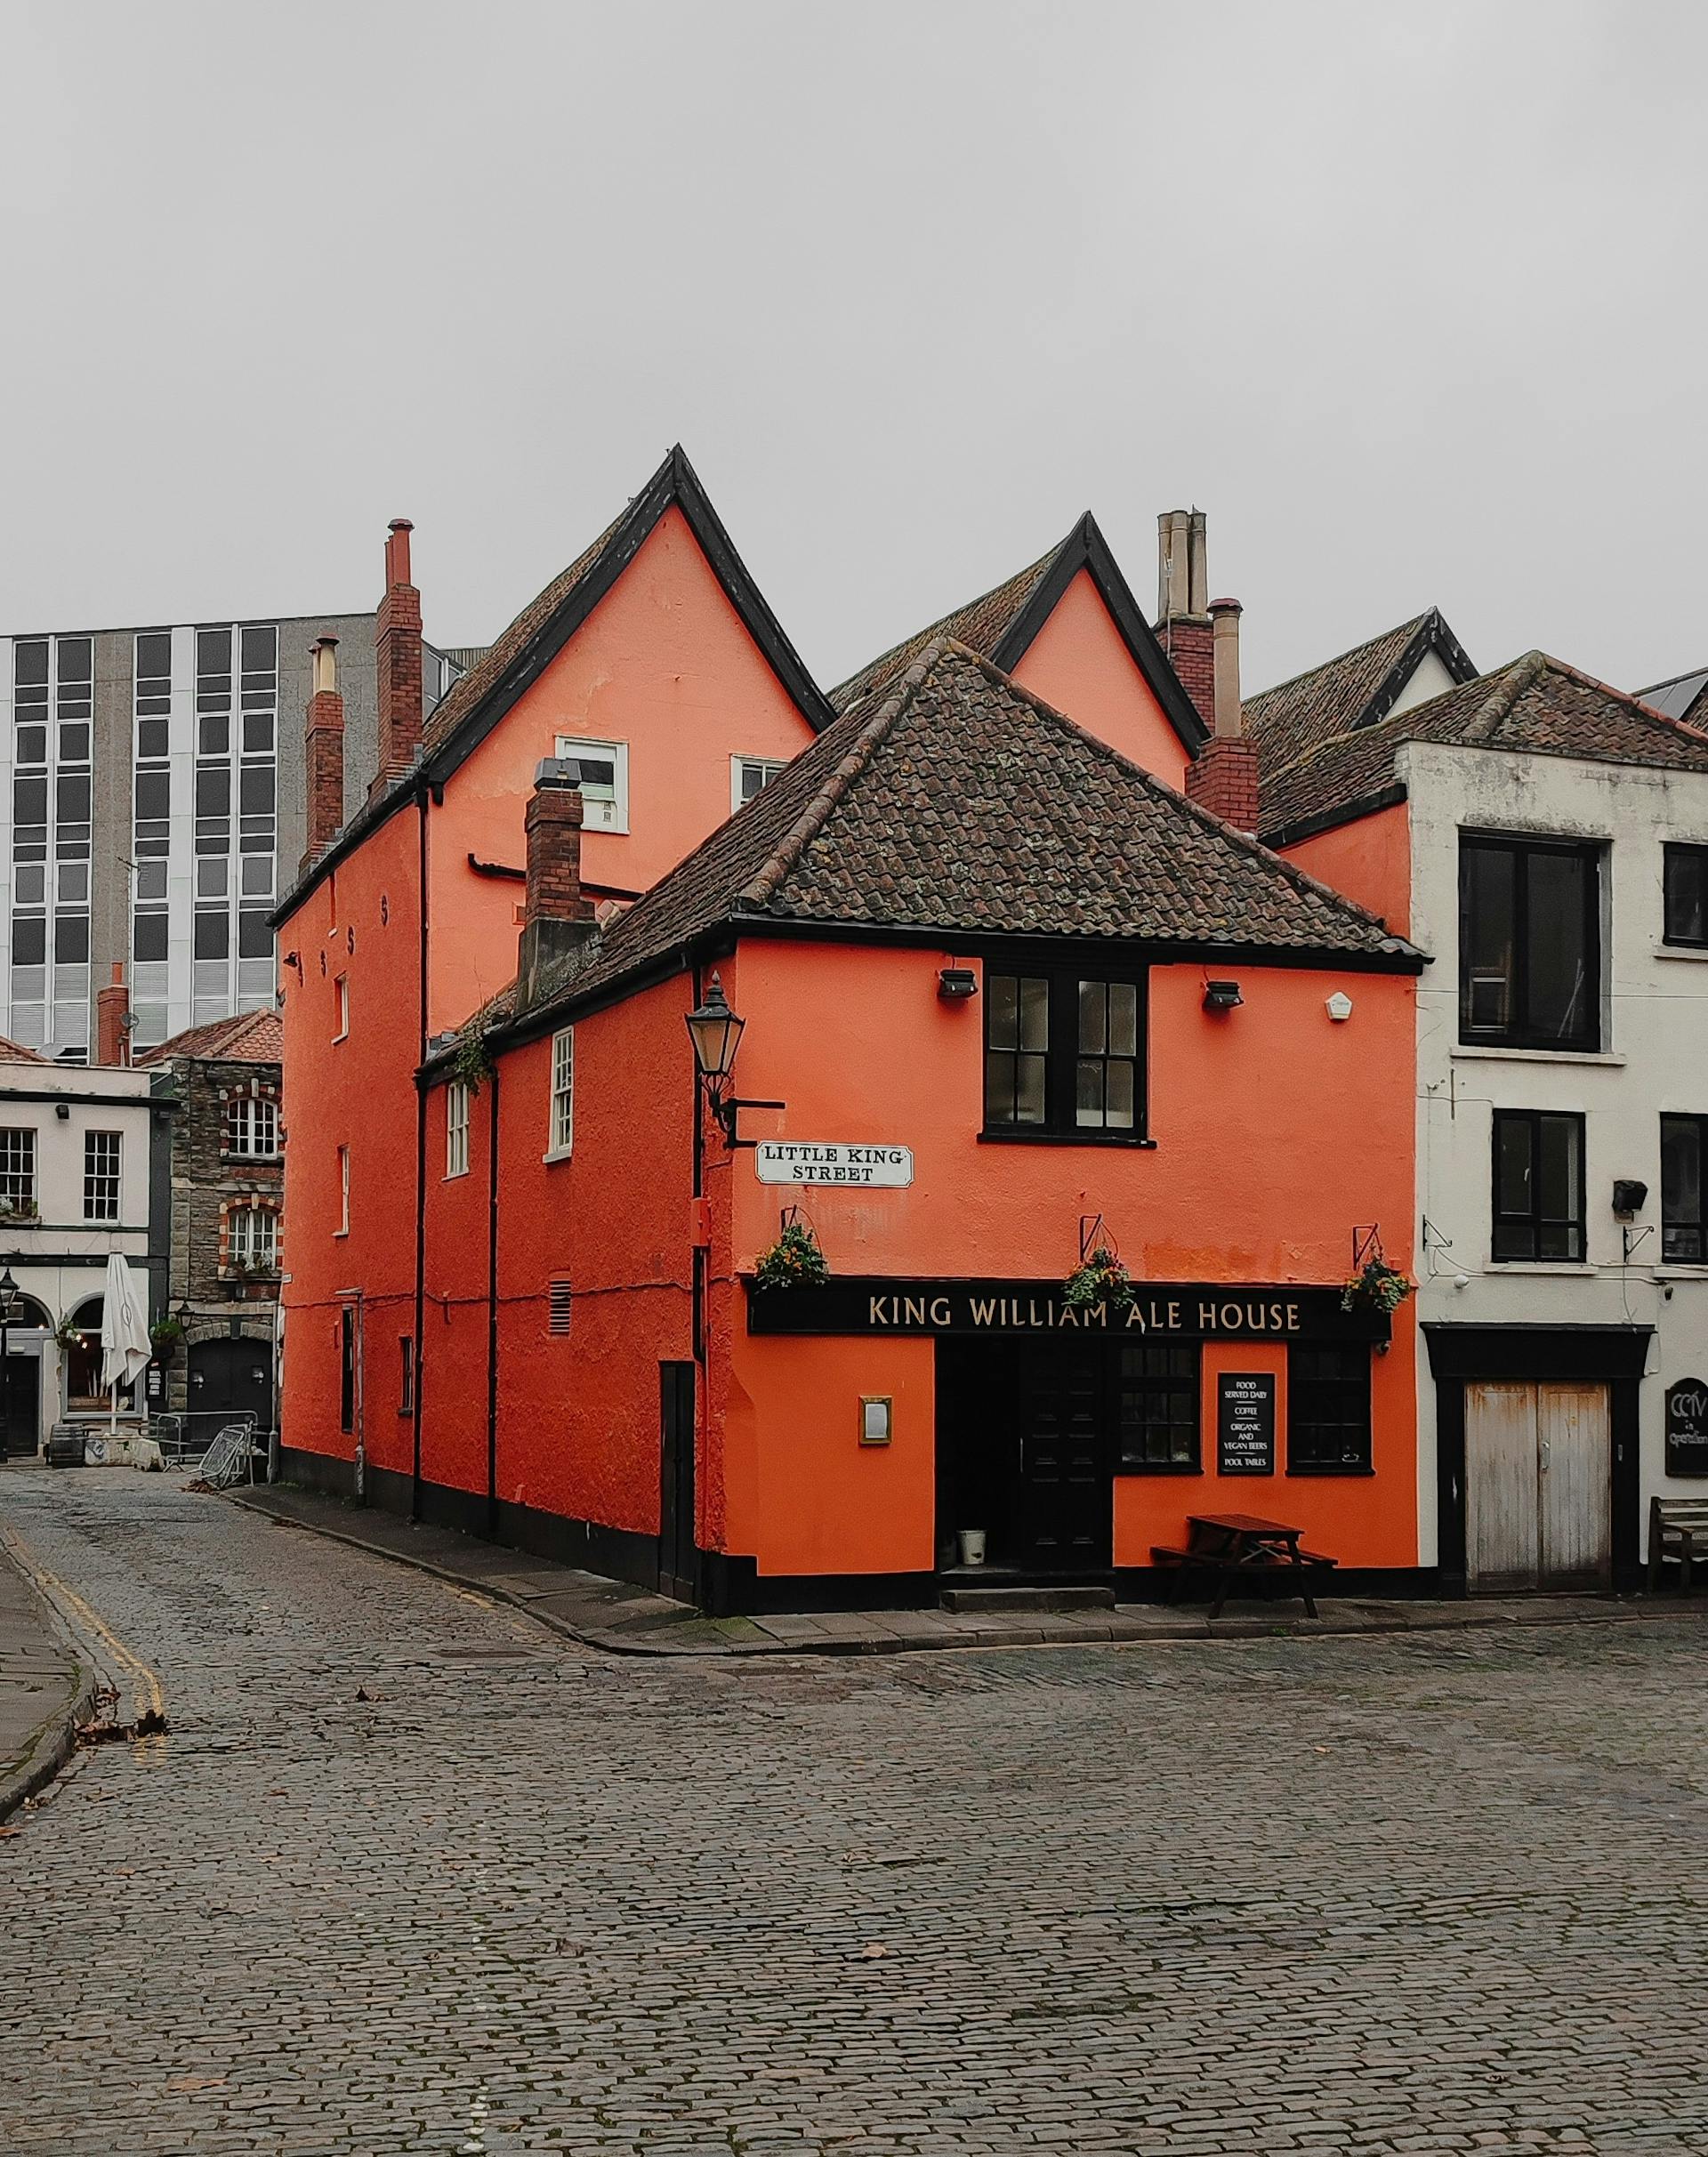 <p>The King William Ale House is a historic public house situated on King Street in Bristol, England. It dates from 1670 and was originally part of a row of three houses. The three have been designated by English Heritage as a grade II* listed building since 8 January 1959. </p><p><br></p><p>It includes a mixture of 17th-century and 18th-century features, such as timber-framed gables, sash windows, and a stone fireplace. It is currently owned and operated by Samuel Smith Old Brewery, which serves traditional English beer and ale.</p><p><br></p><p>The pub is family friendly and offers hearty home cooked food and drinks in a cosy and welcoming atmosphere. It has two entrances, one on King Street and the other on Little King Street, and has seating booths and pool tables inside. It is open from Tuesday to Sunday, with varying hours depending on the day. It has a 3.5 rating on Tripadvisor, based on 135 reviews, with mixed feedback on the service, prices, and quality of food and drinks.</p><p><br></p><p>If you are interested in visiting the King William Ale House, you can find more information on its website. You can also see some of the other pubs and restaurants on King Street, such as The Famous Royal Navy Volunteer or The Old Duke, which are part of the same historic row of buildings. King Street is a popular destination for tourists and locals alike, as it is close to the Bristol Old Vic theatre, the Harbourside, and the Queen Square park.</p><p><br></p>